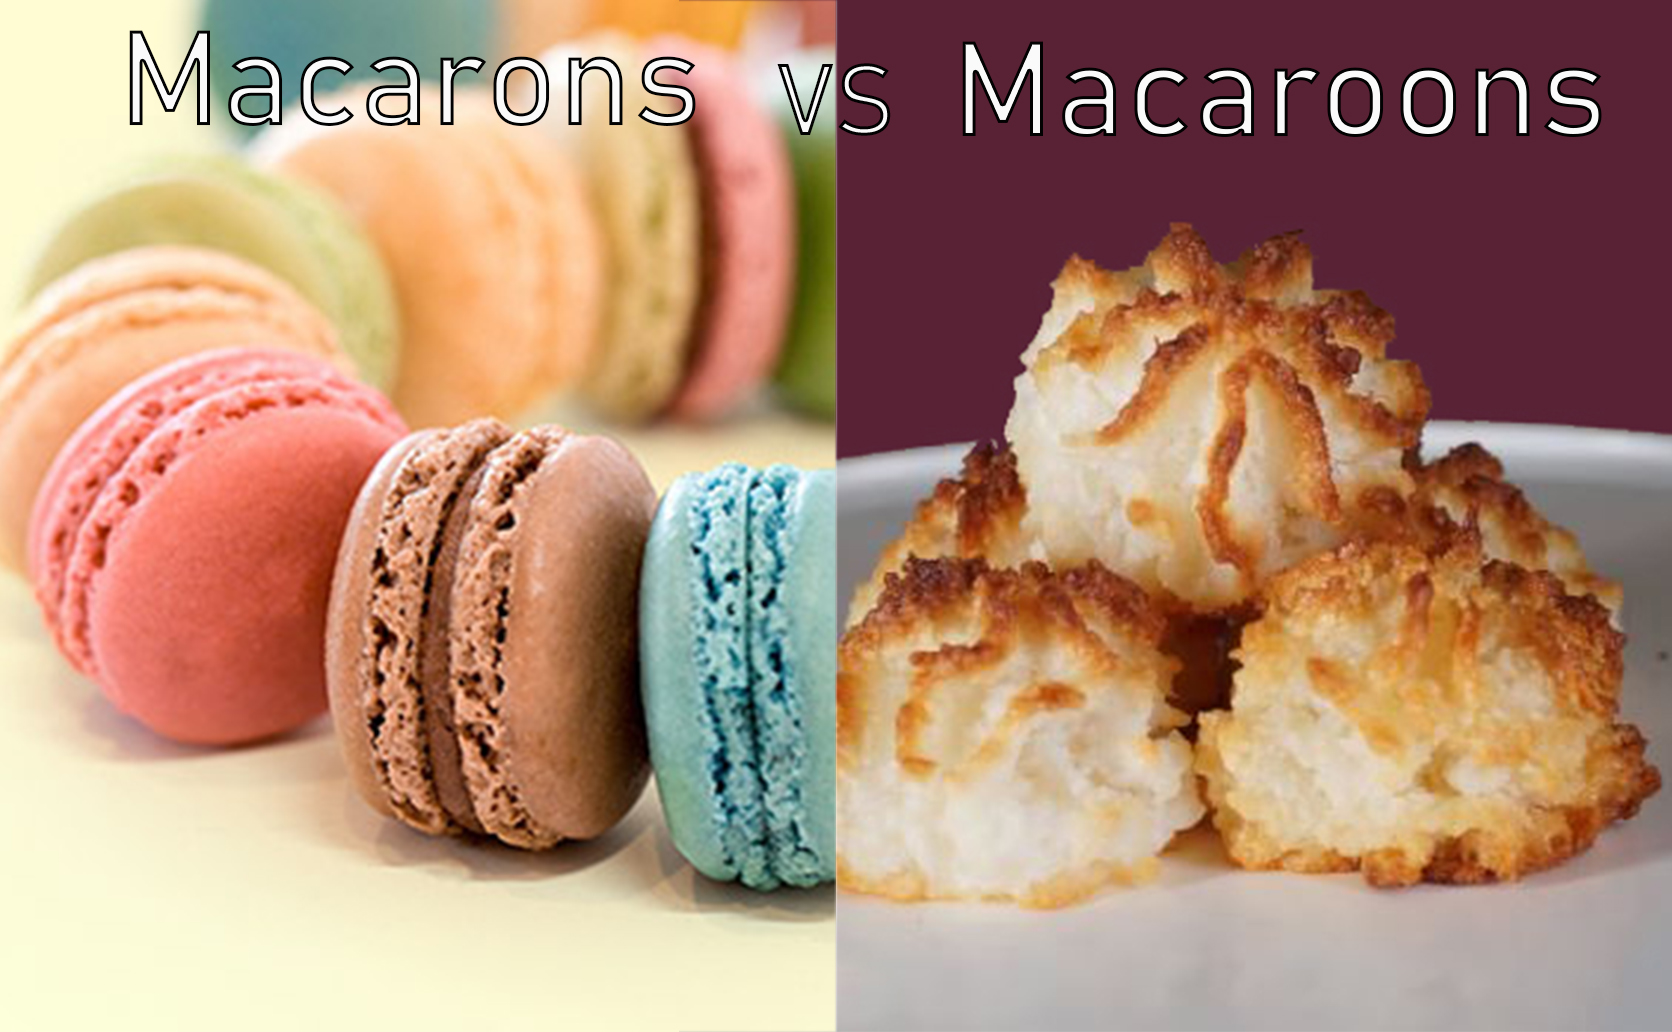 Macarons on left side of image and Macaroons on the right side